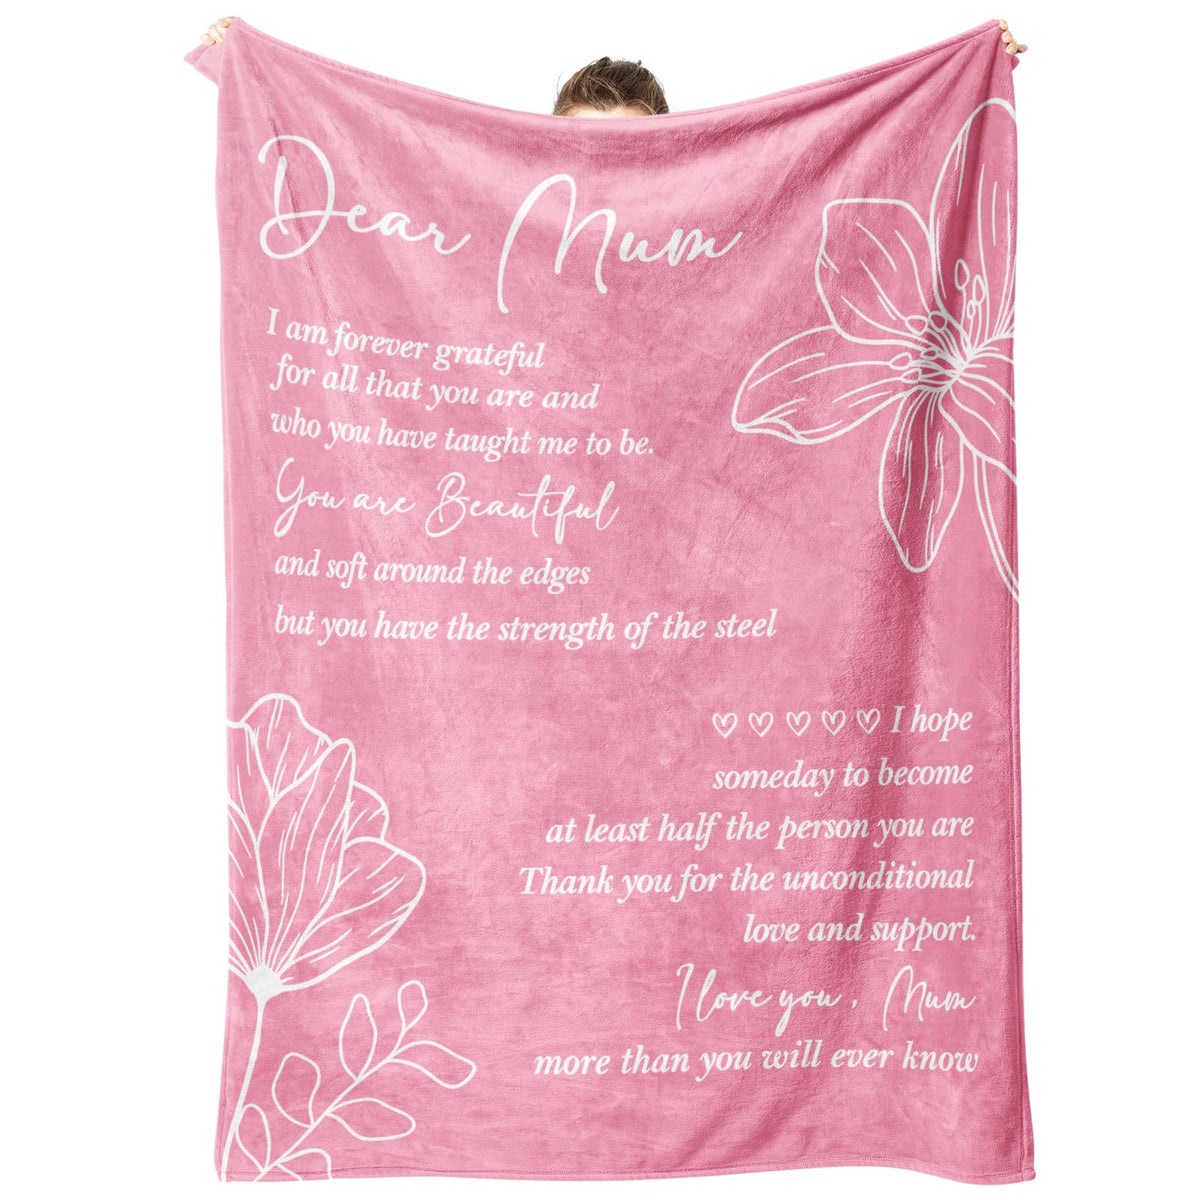 Gowelly Mum Gifts, Mothers Day Presents for Mum from Daughter Son, Pink Blanket with Letter & Floral Print, Mum Birthday Gifts, Soft Throw Blankets 50 x 60 IN